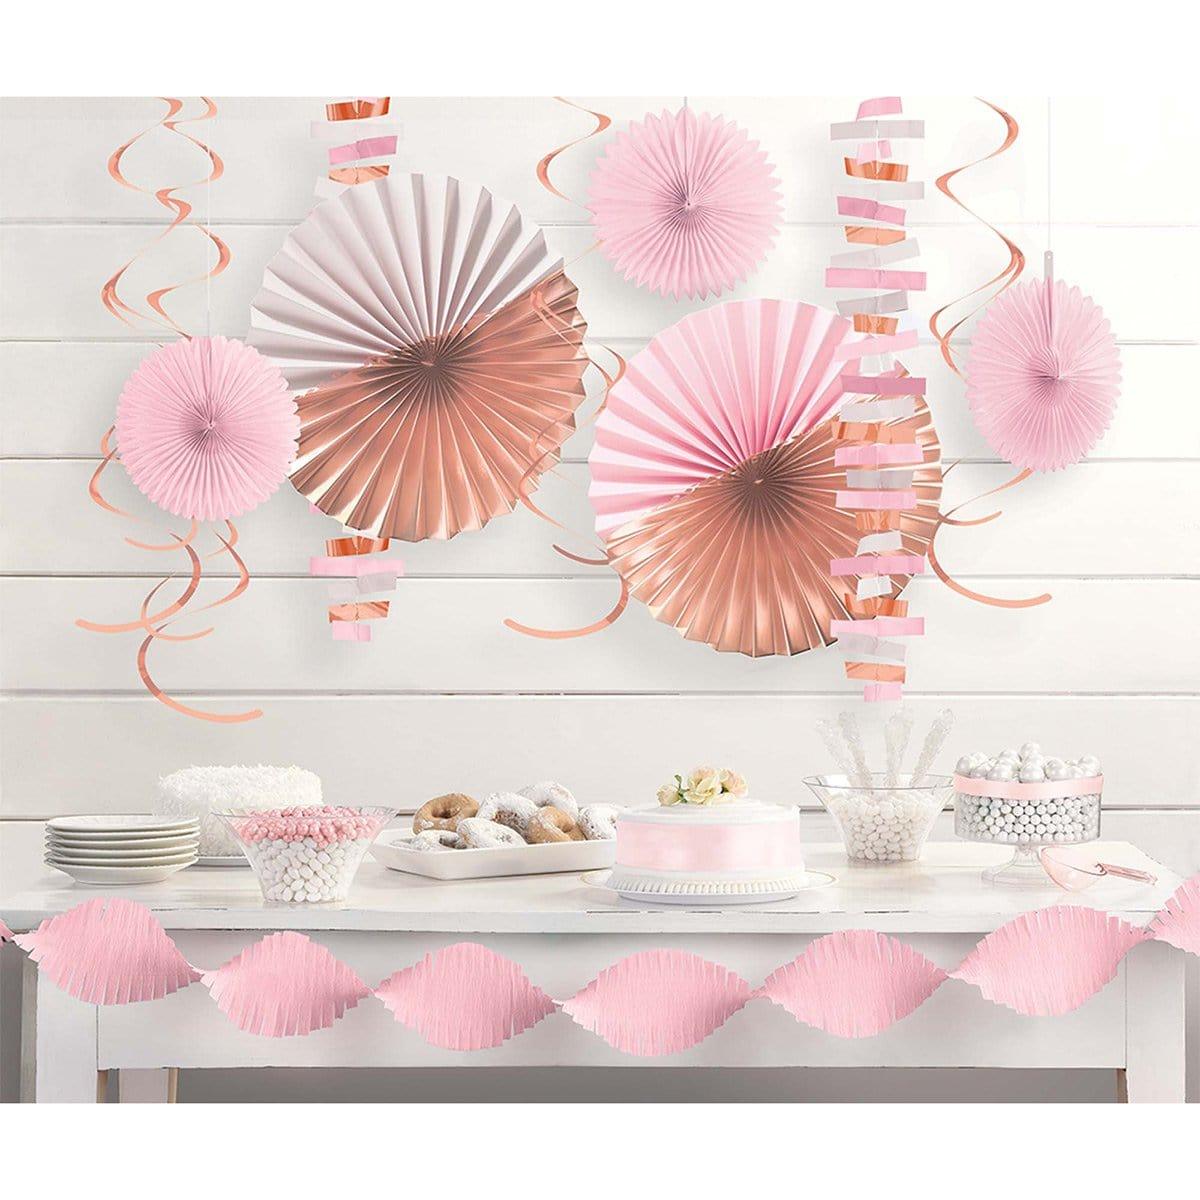 Buy Decorations Room Decorating Kit - Rose Gold sold at Party Expert